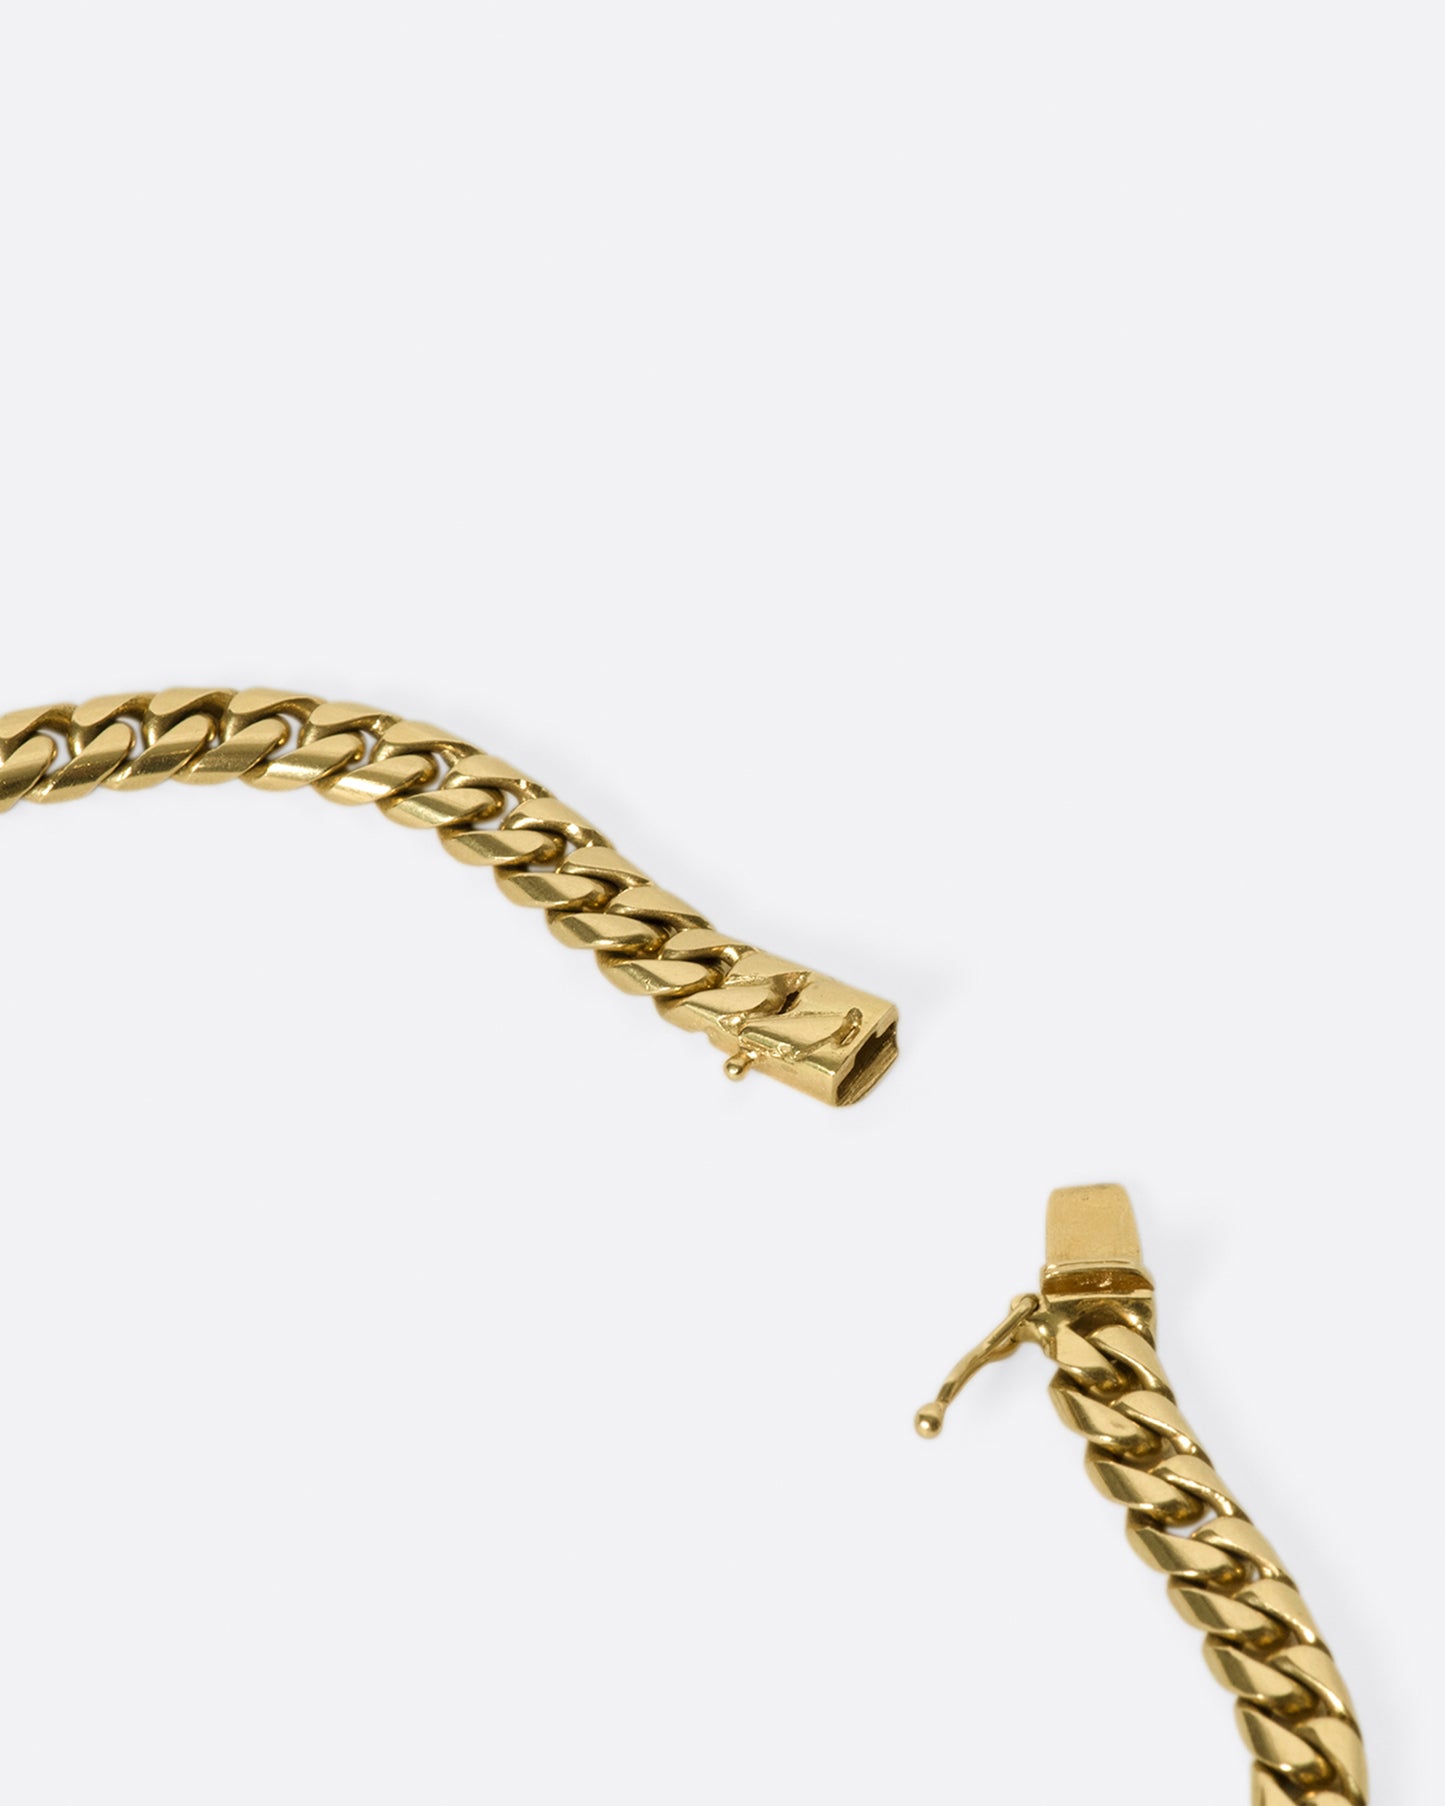 This chain is a heavyweight with its solid gold links, but it feels like butter.